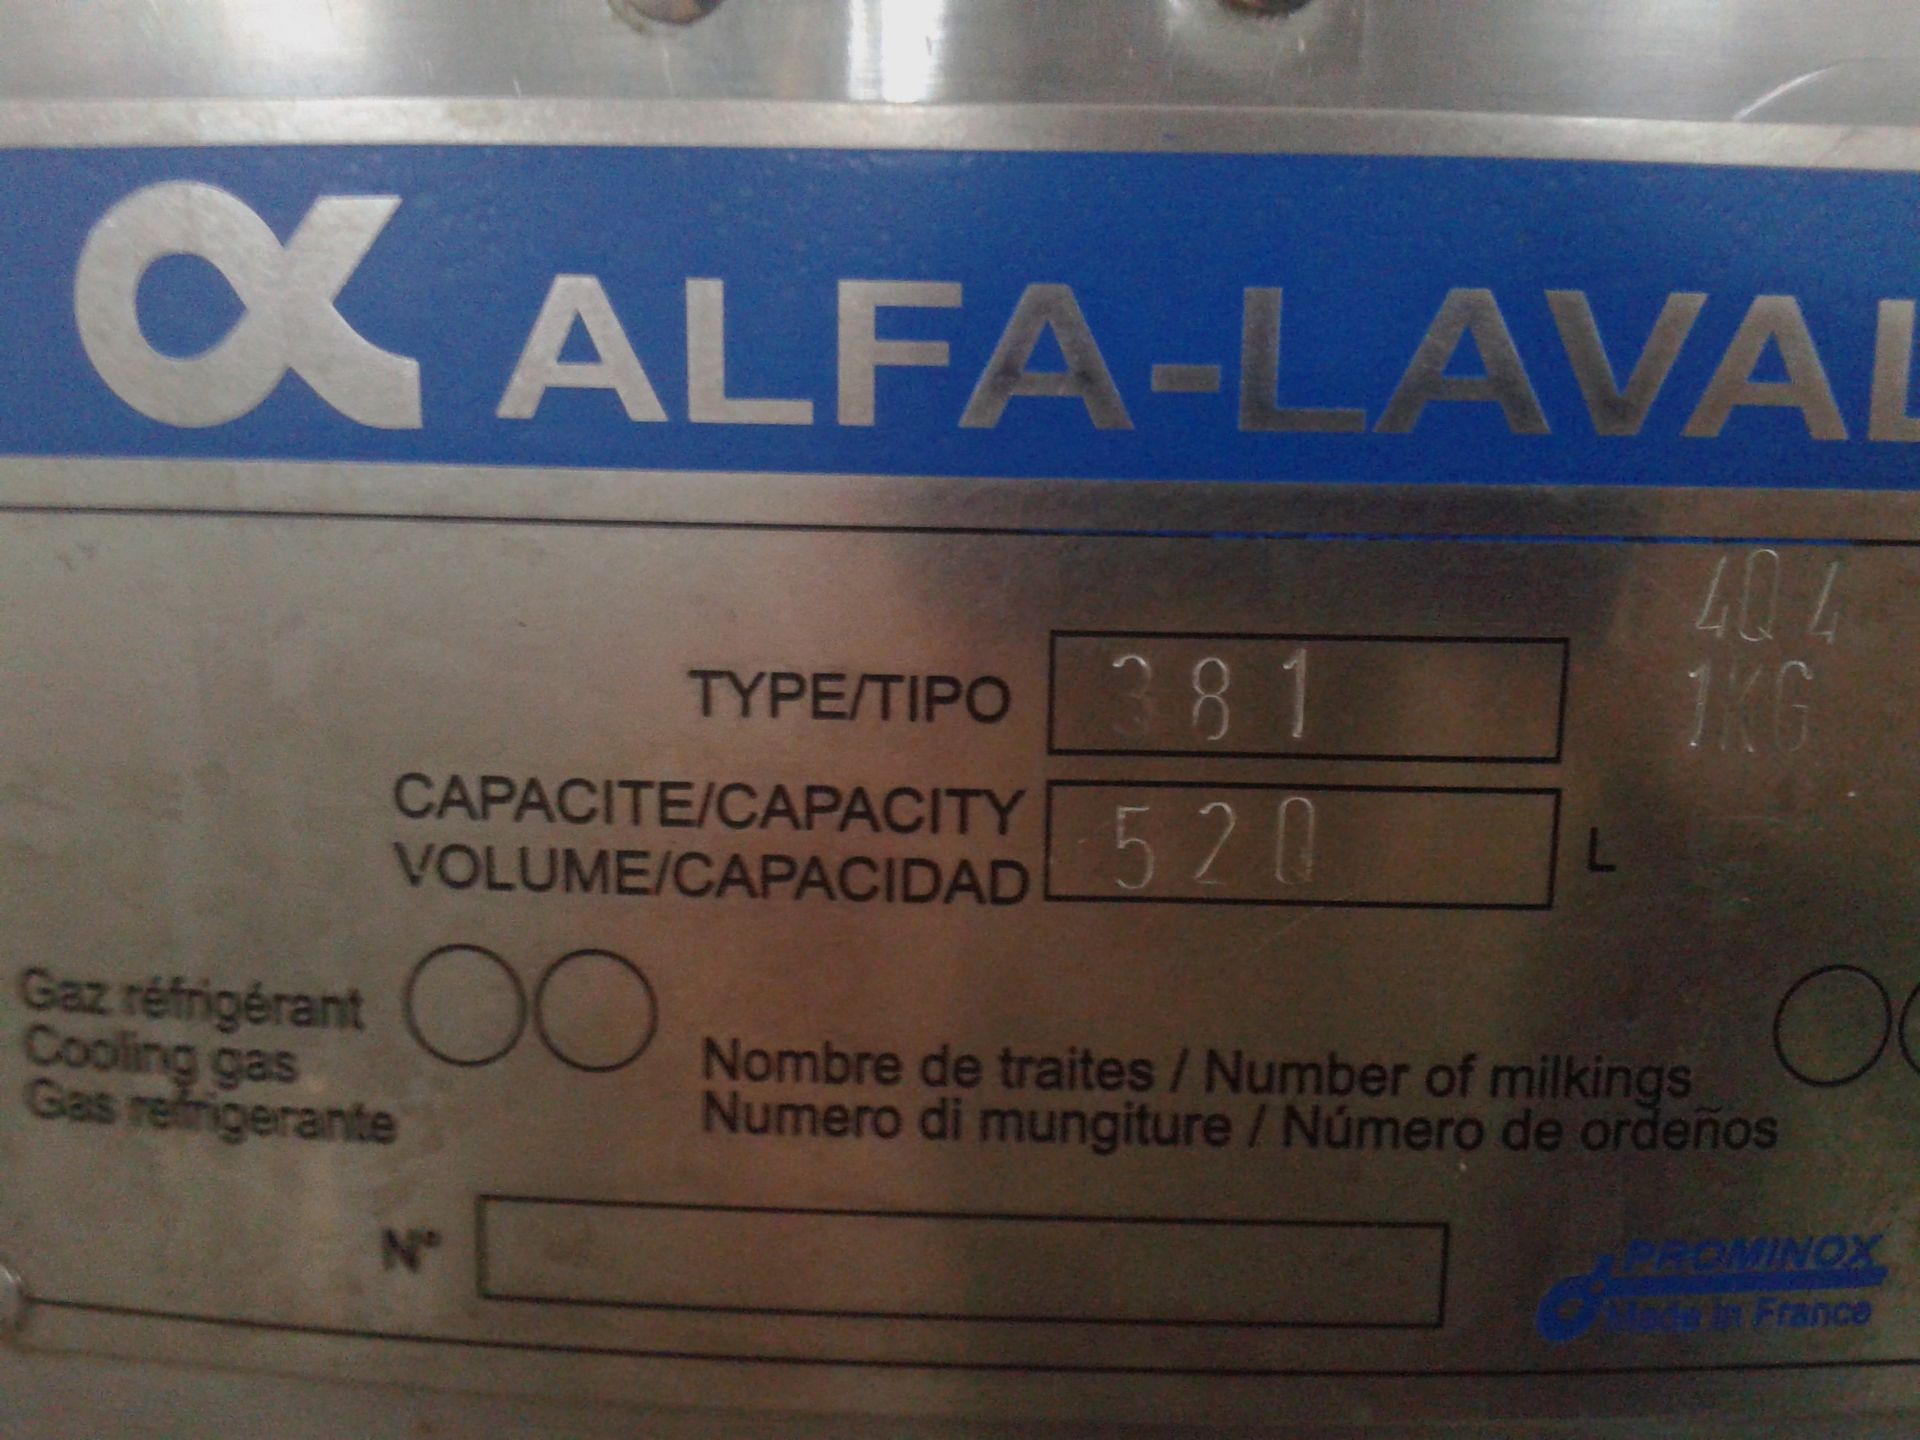 Alfa Laval 520 Liter Milk Cooling Tank, Type 381, Equipped with Top Mount Prop Agitation, On-Board - Image 3 of 3